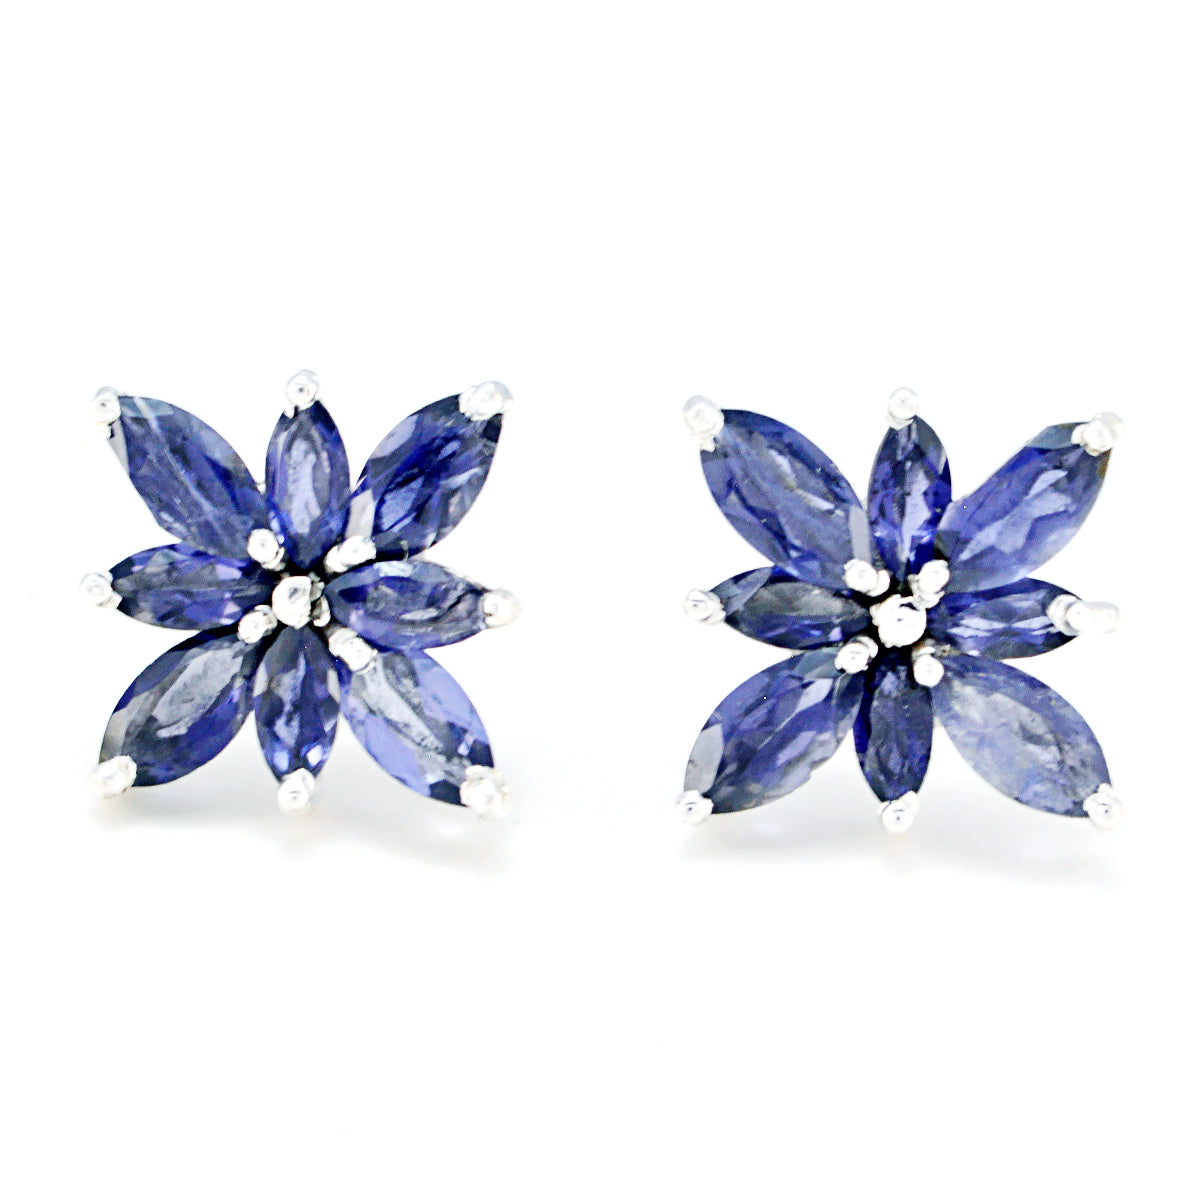 Riyo Nice Gemstone multi shape Faceted Nevy Blue Iolite Silver Earring gift for friendship day